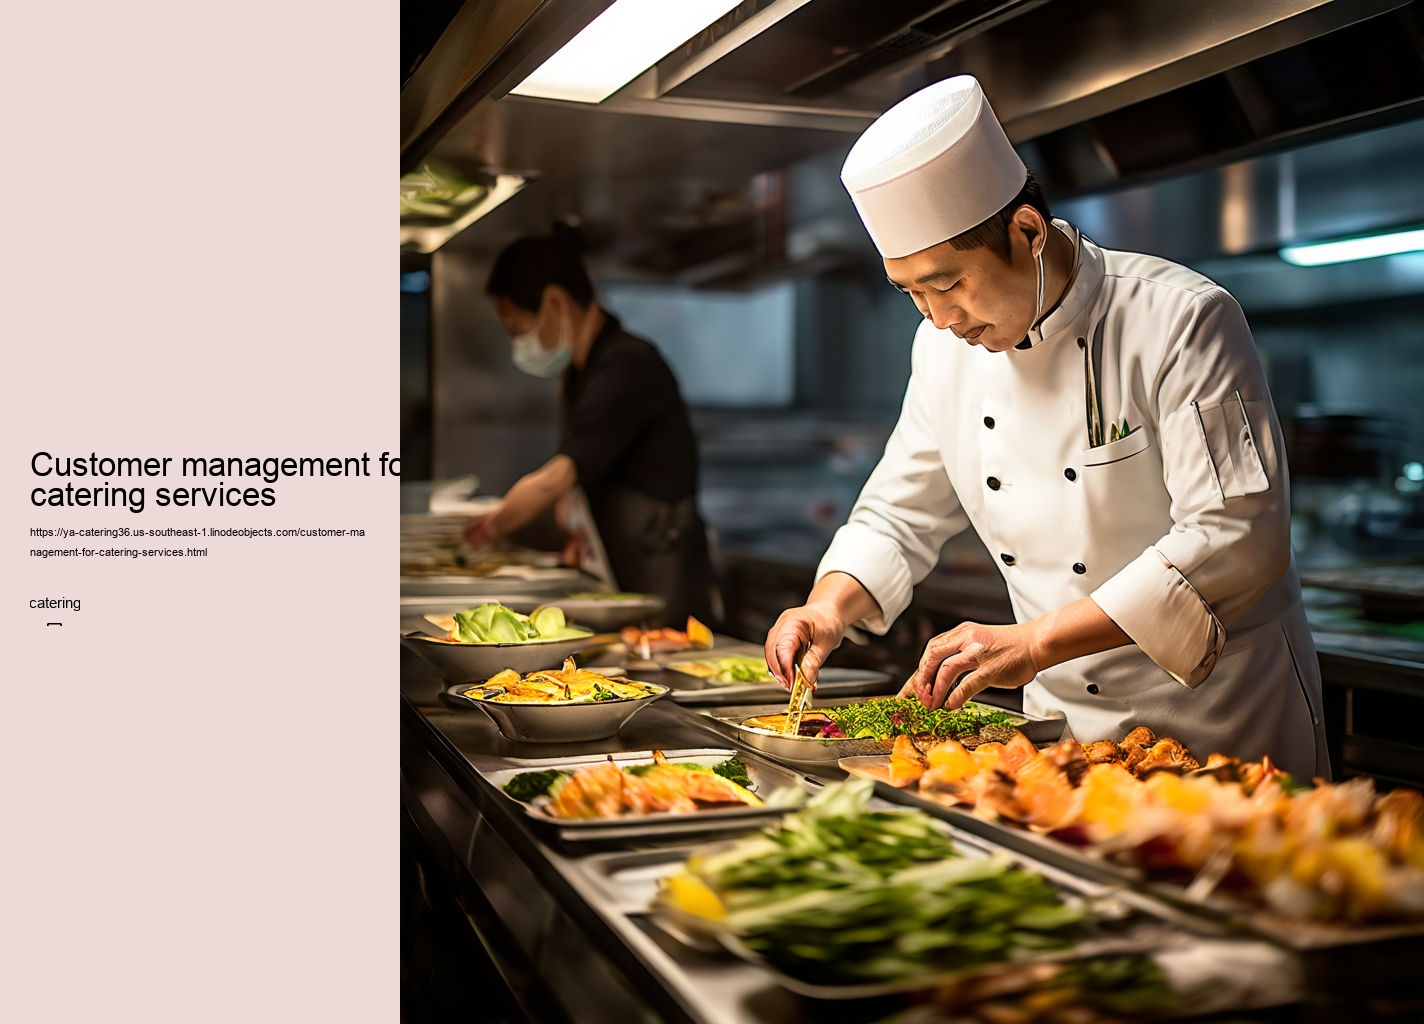 Customer management for catering services